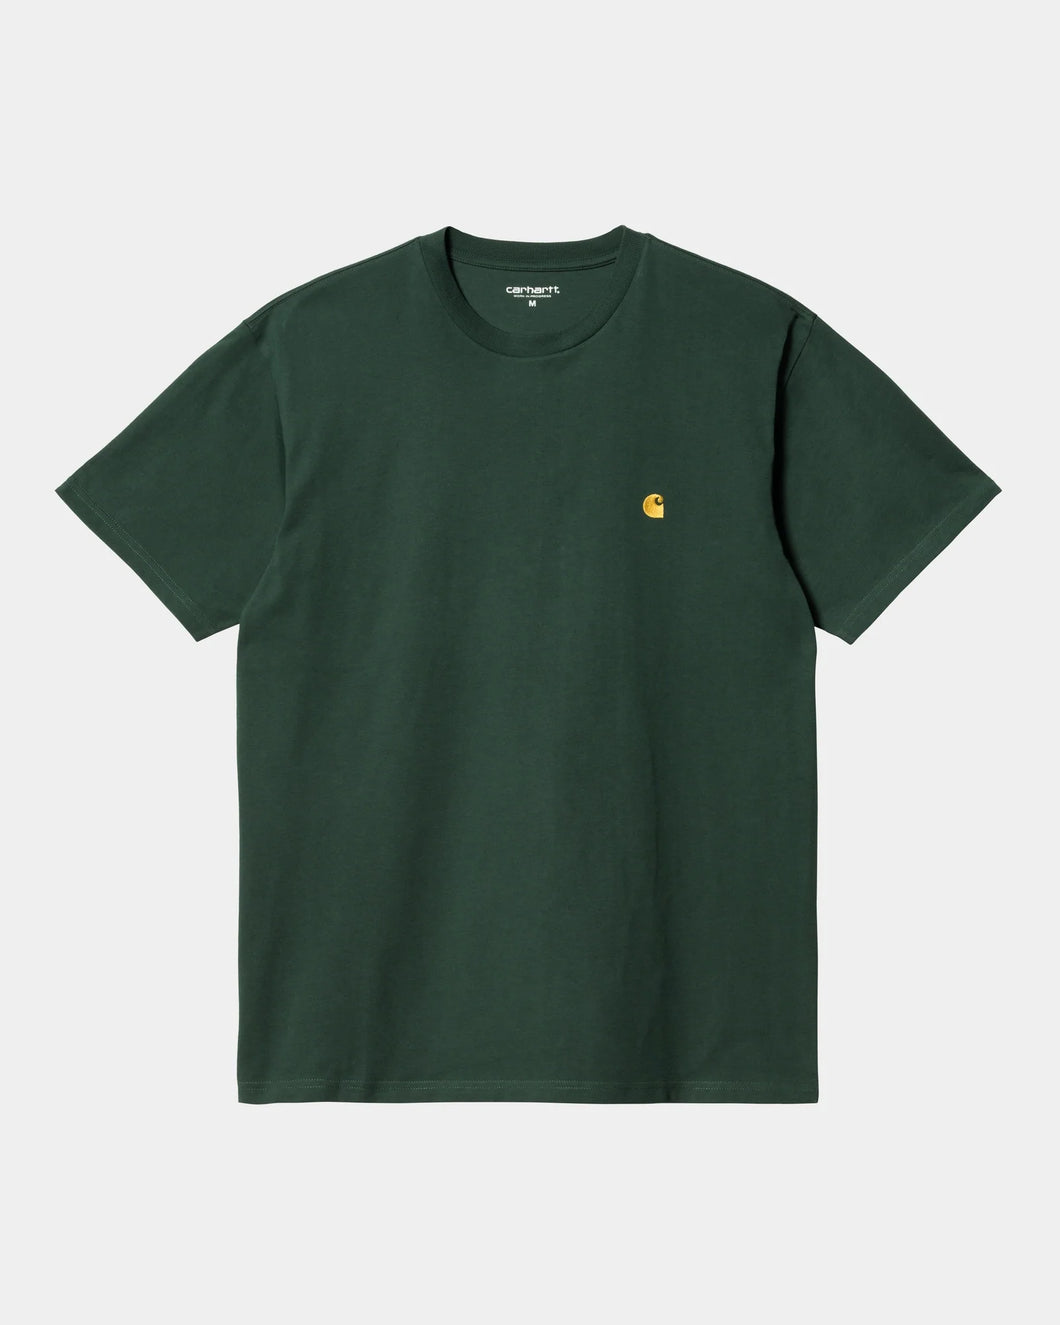 Carhartt WIP S/S Chase T-Shirt Discovery Green/Gold